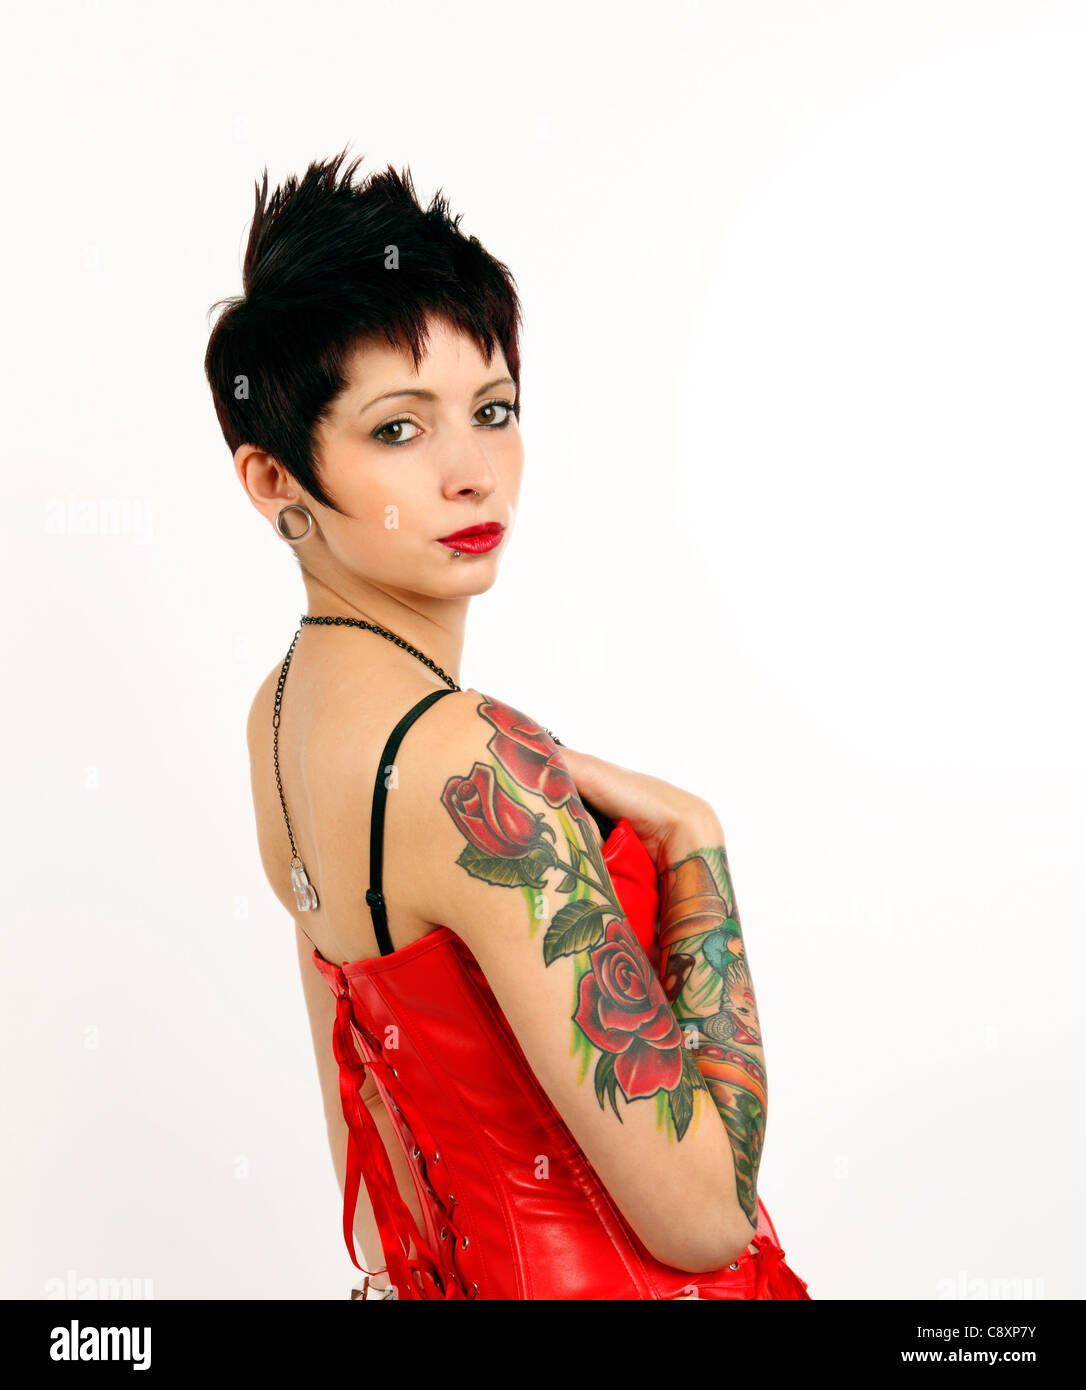 young woman with tattoos on her arm, youth culture, body art Stock Photo